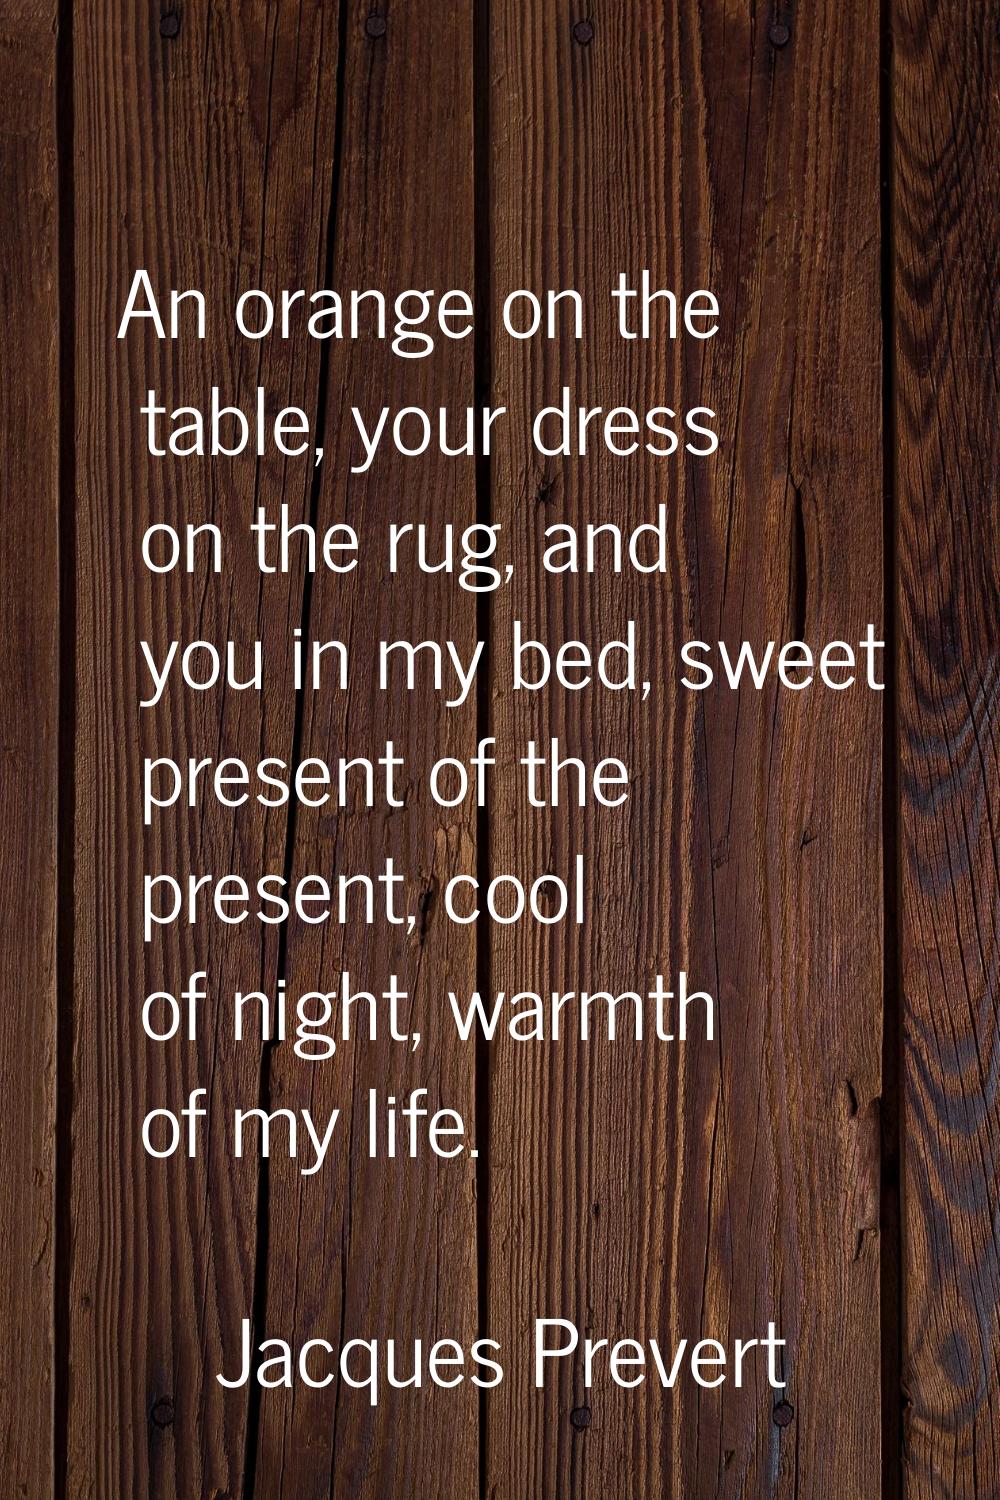 An orange on the table, your dress on the rug, and you in my bed, sweet present of the present, coo